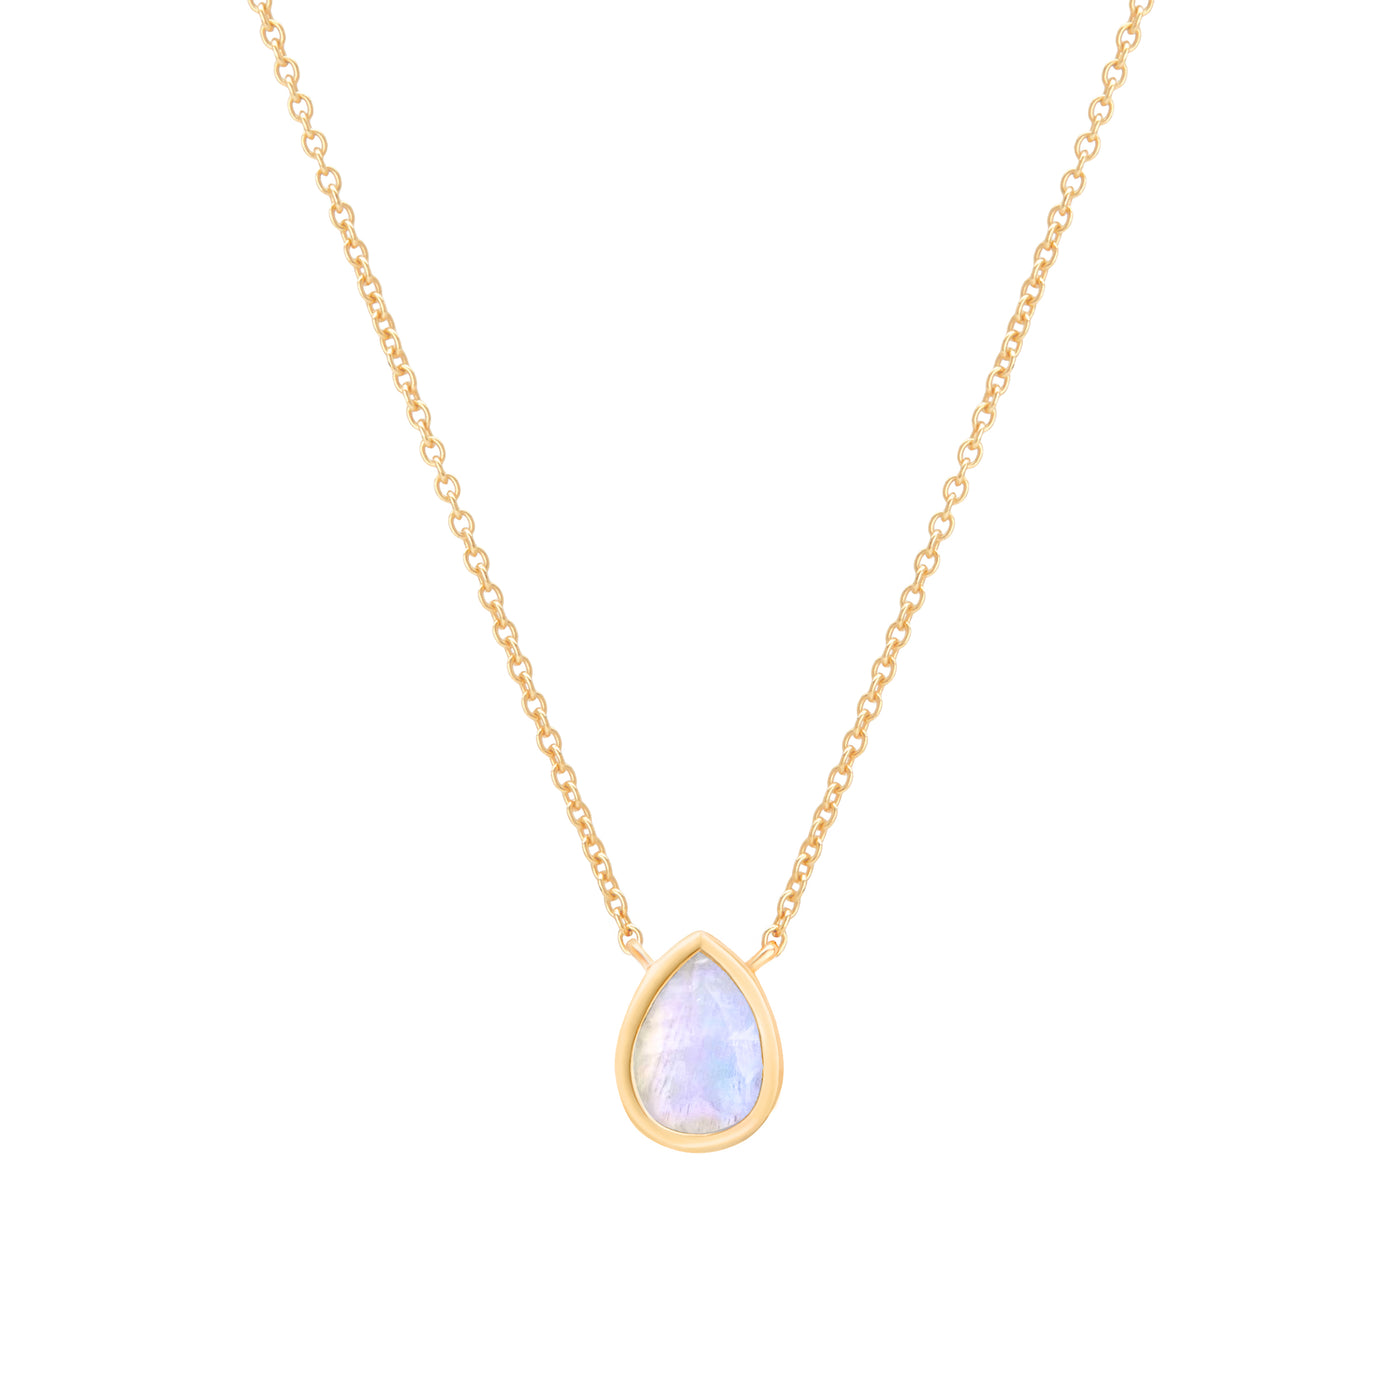 14 Karat Yellow Gold Necklace with Pear Shaped Moonstone Against White Background